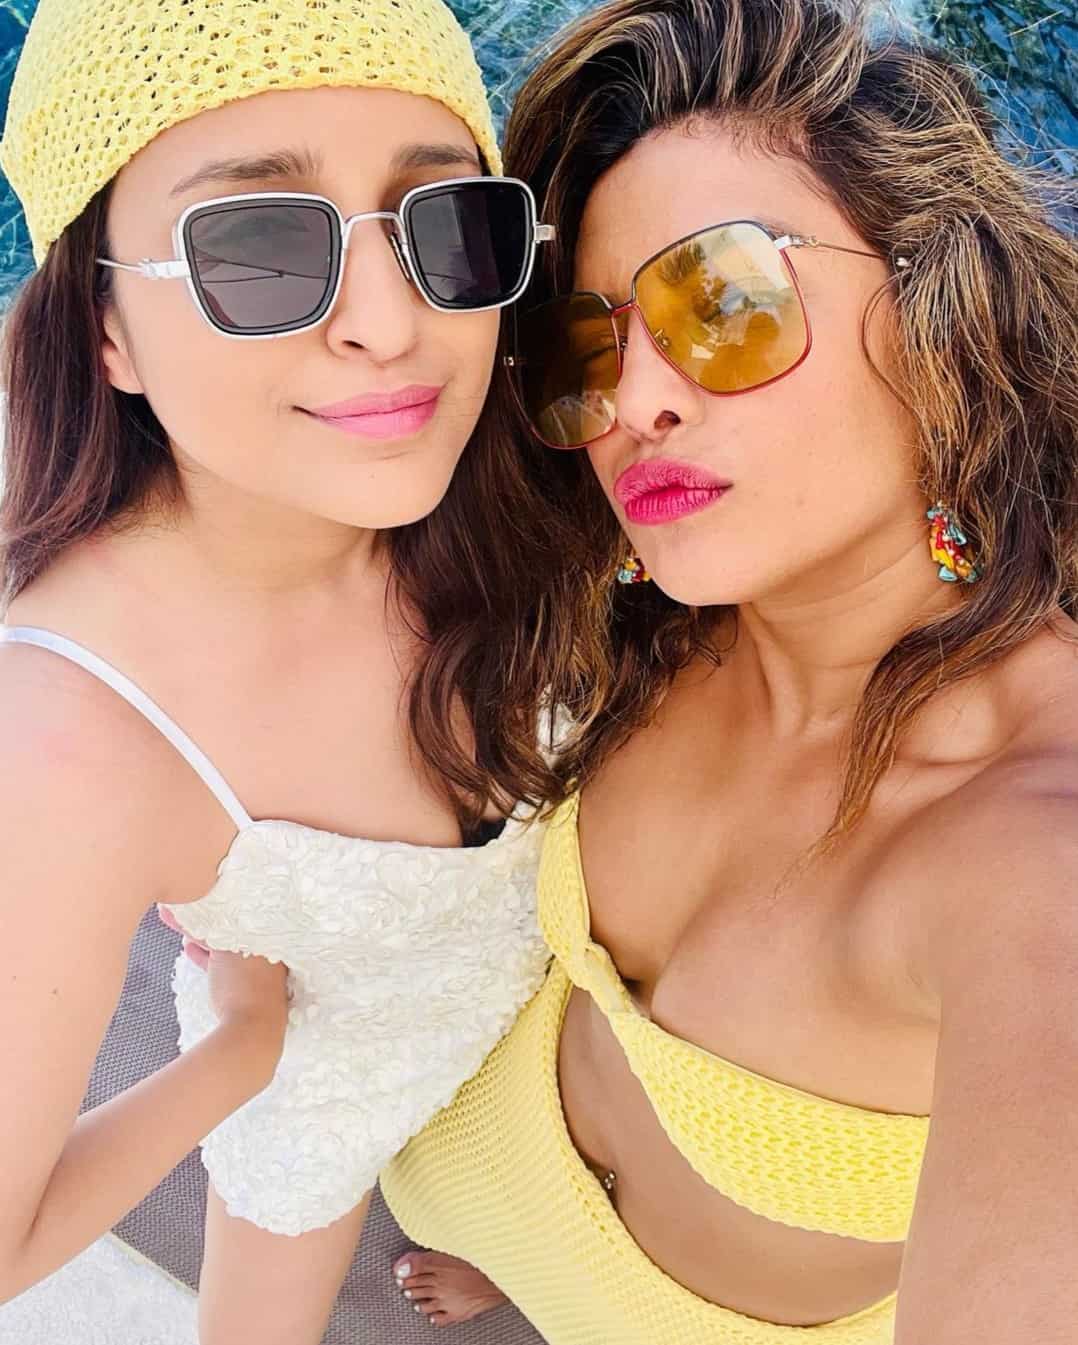 Sisters looking hot together